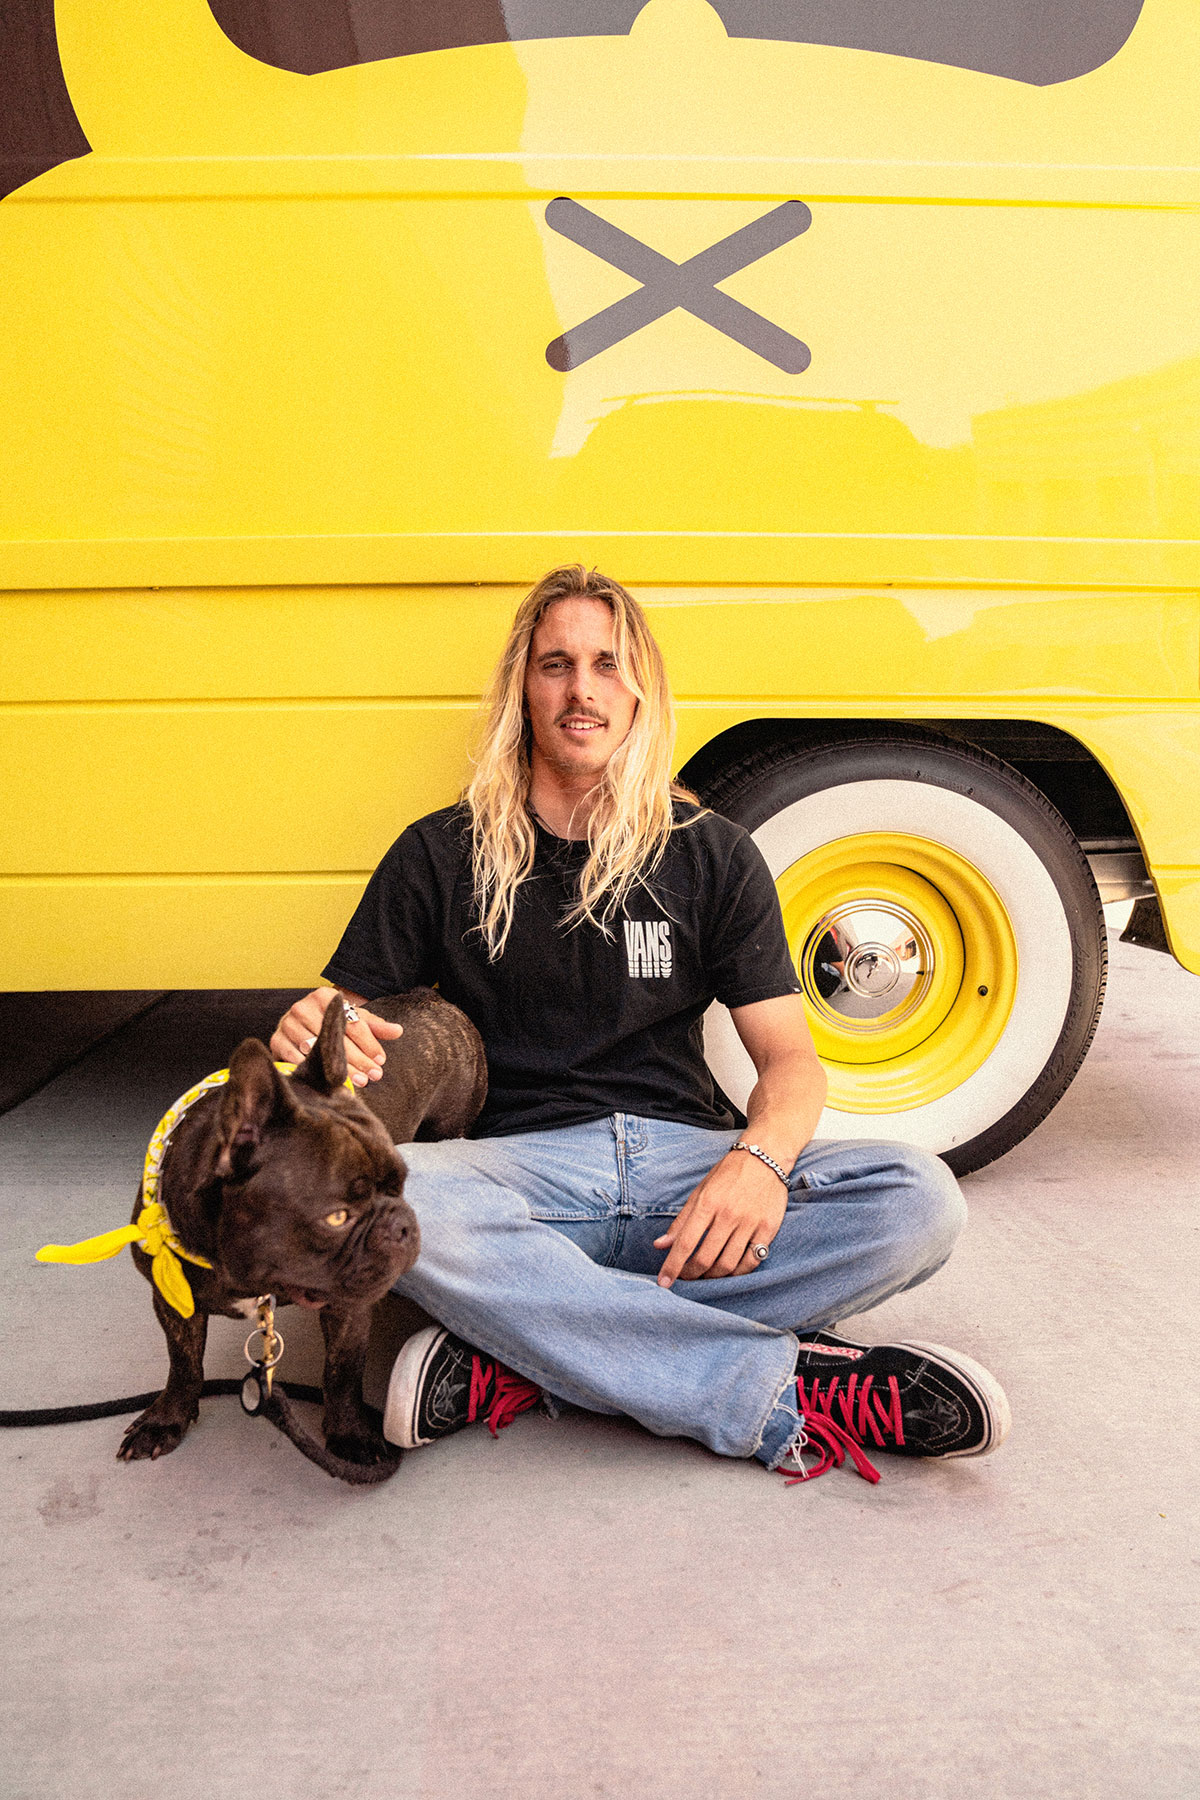 professional surfer Kyuss King sitting on ground with dog